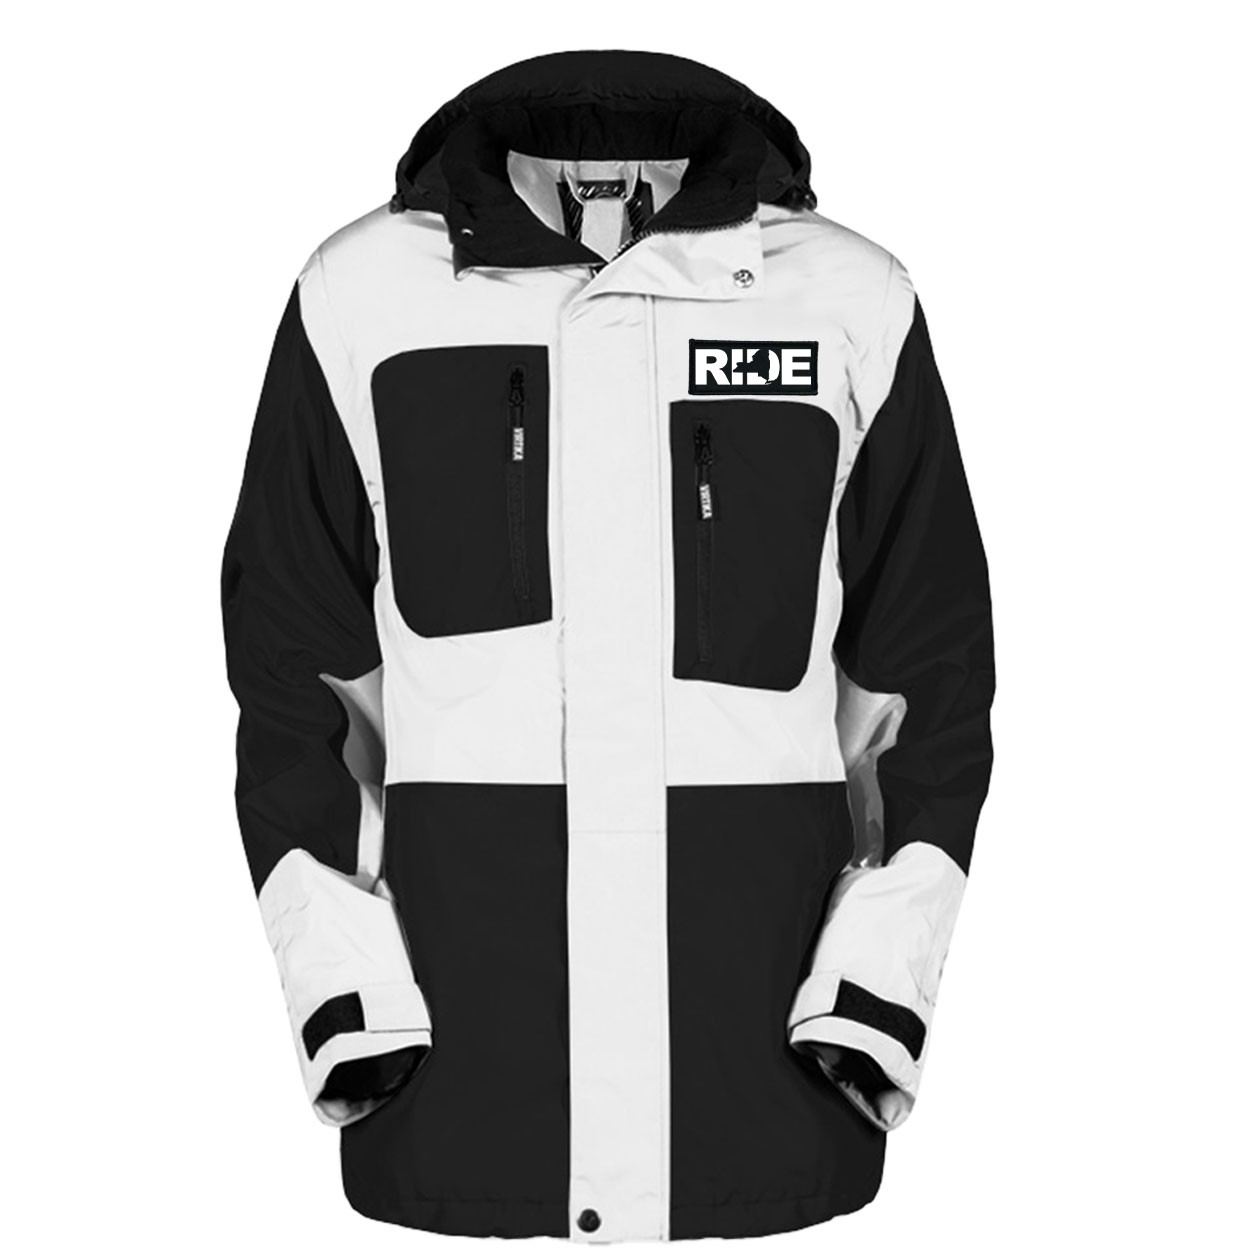 Ride New York Classic Woven Patch Pro Snowboard Jacket (Black/White)